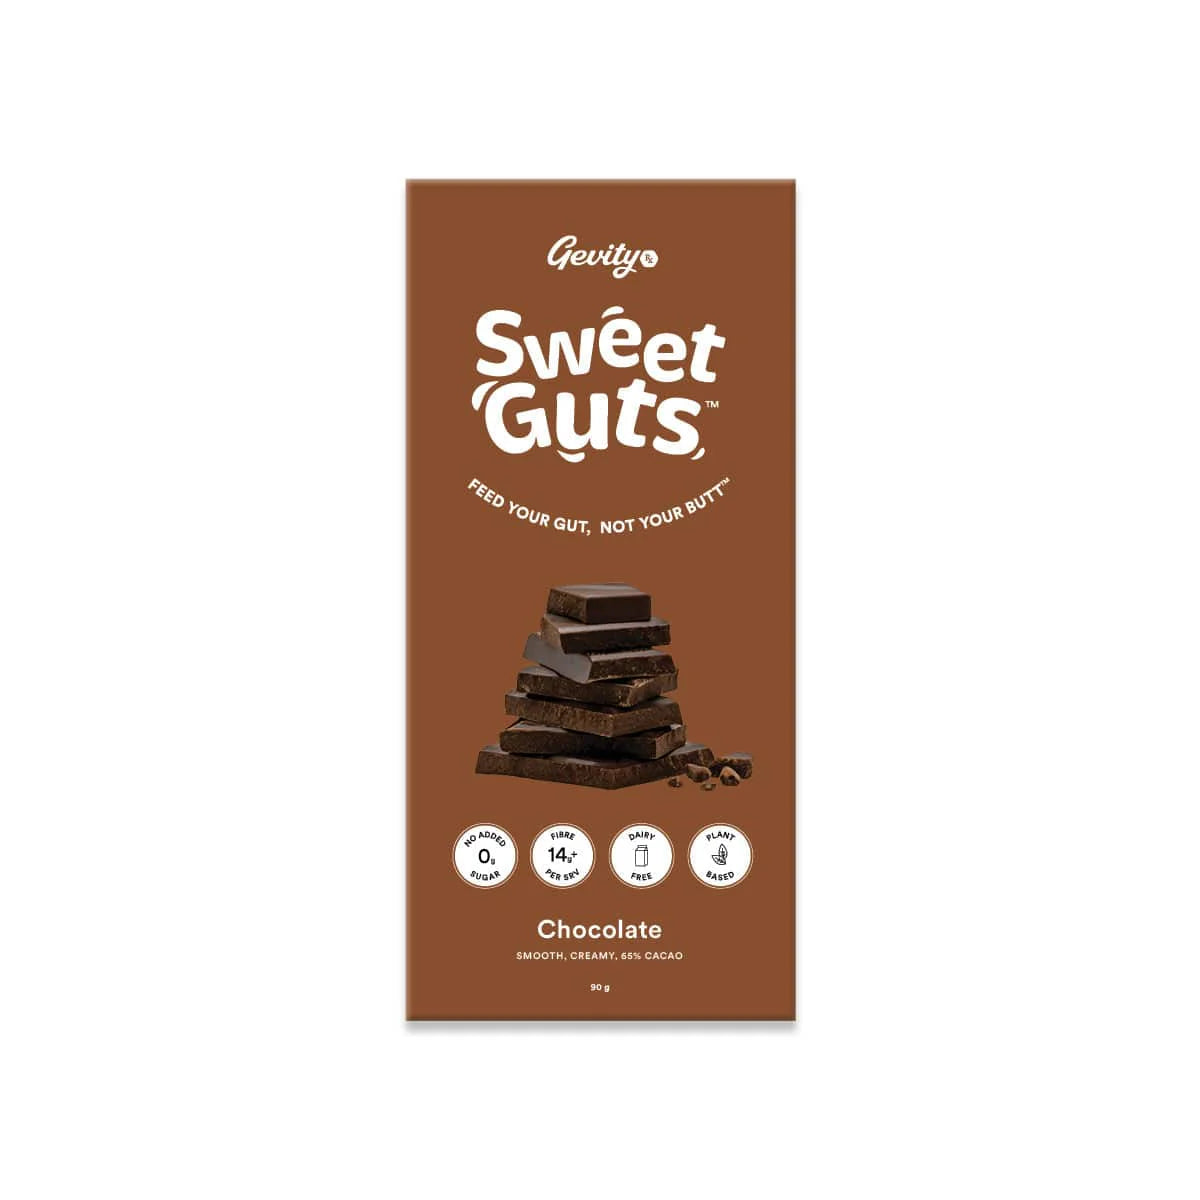 Gevity Sweet Guts Chocolate 90g, Smooth & Creamy 65% Cacao Feed Your Gut, Not Your Butt